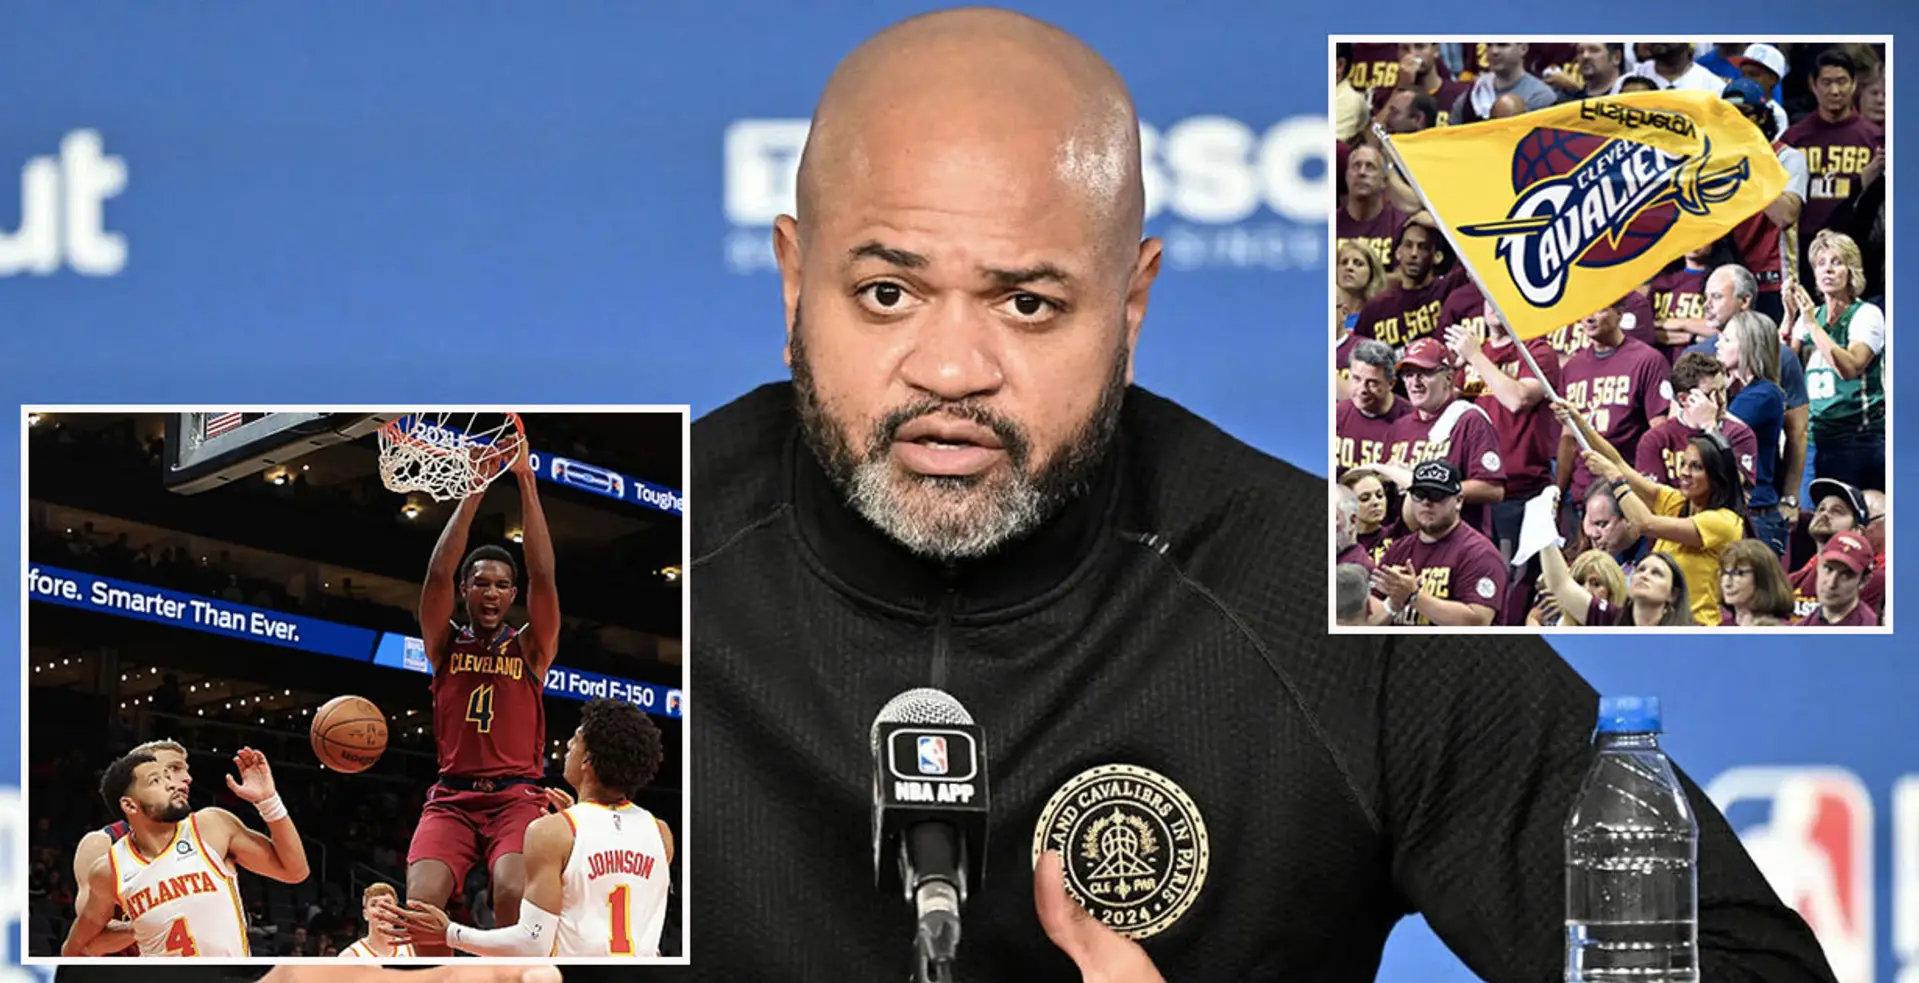 'Line is crossed!': Cleveland Cavaliers' head coach laments bettors threats to him and family